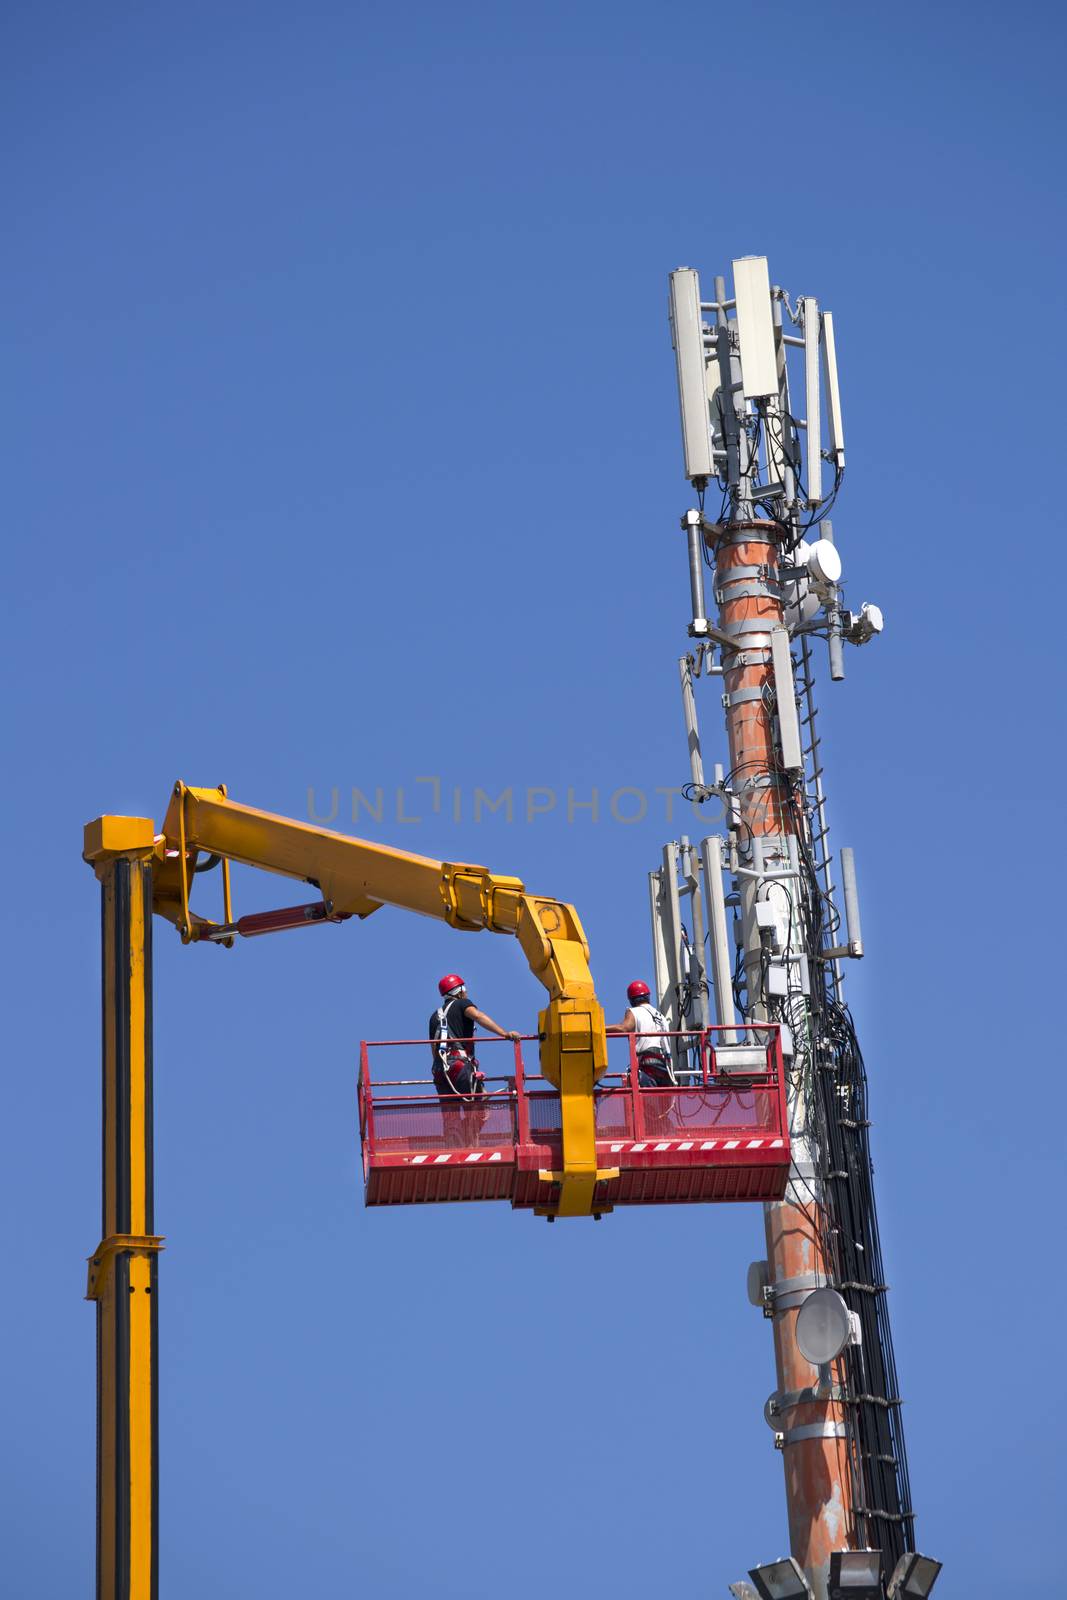 Maintenance to an antenna for communications  by fotografiche.eu